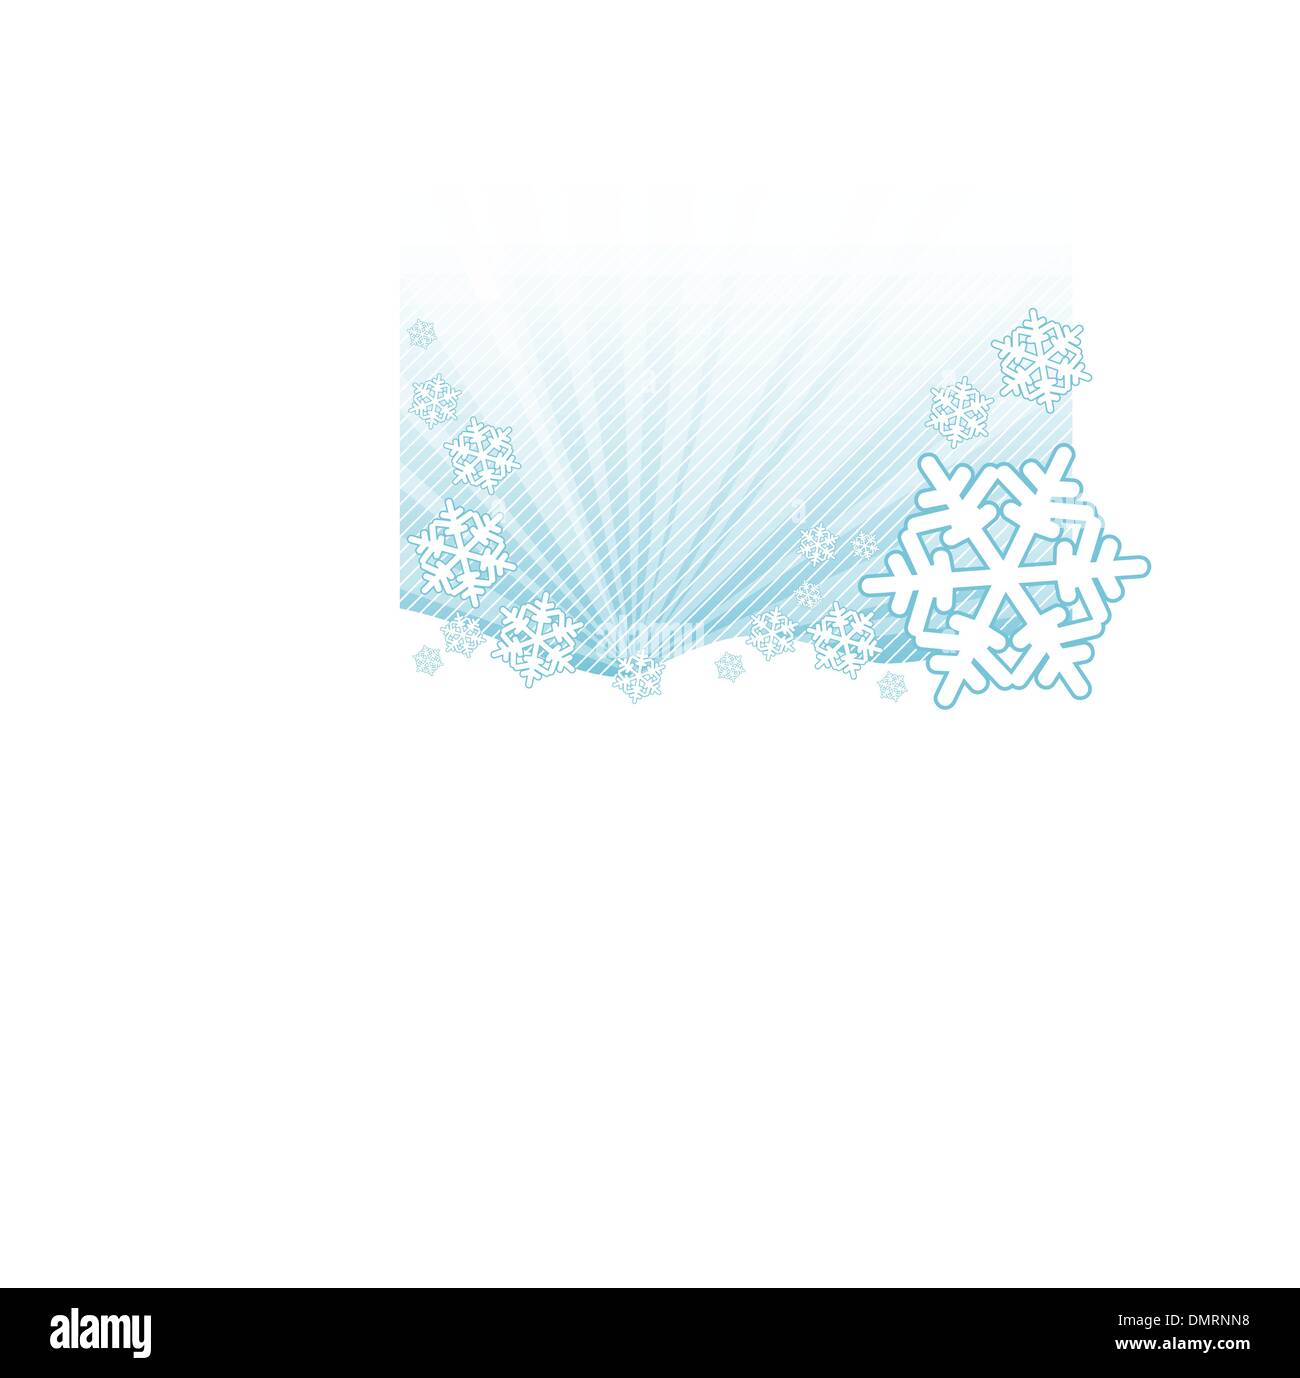 Snow falling night Stock Vector Images - Alamy